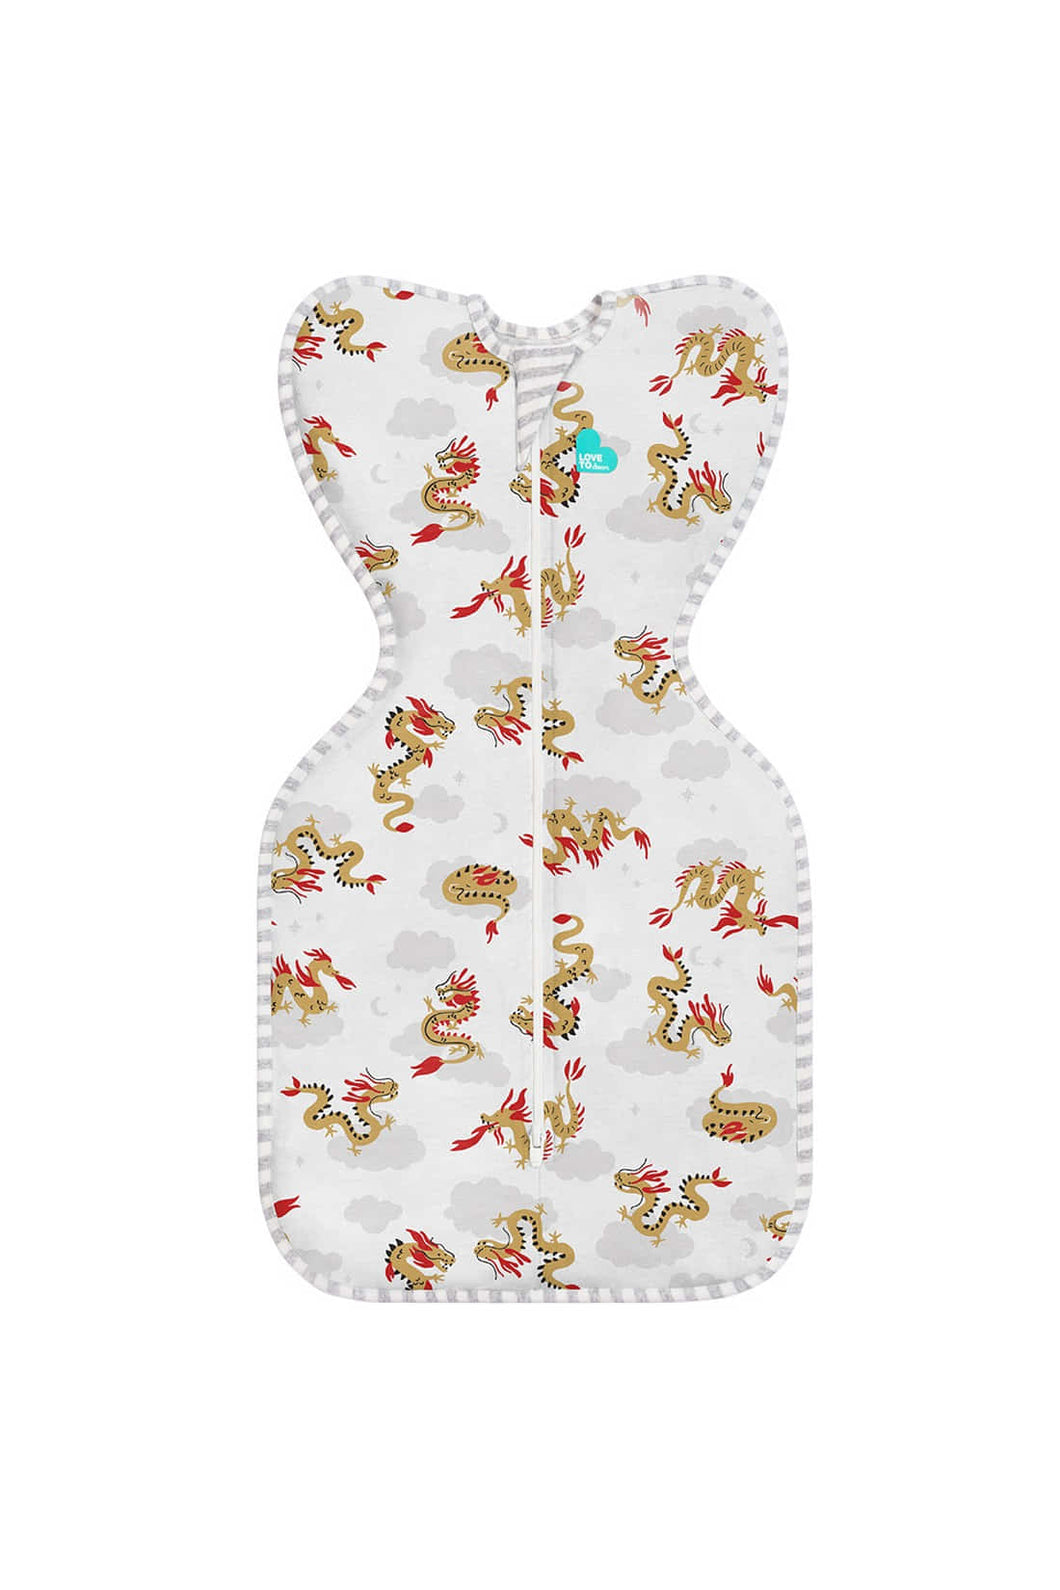 Love To Dream Swaddle Up Original Year of The Dragon White 1